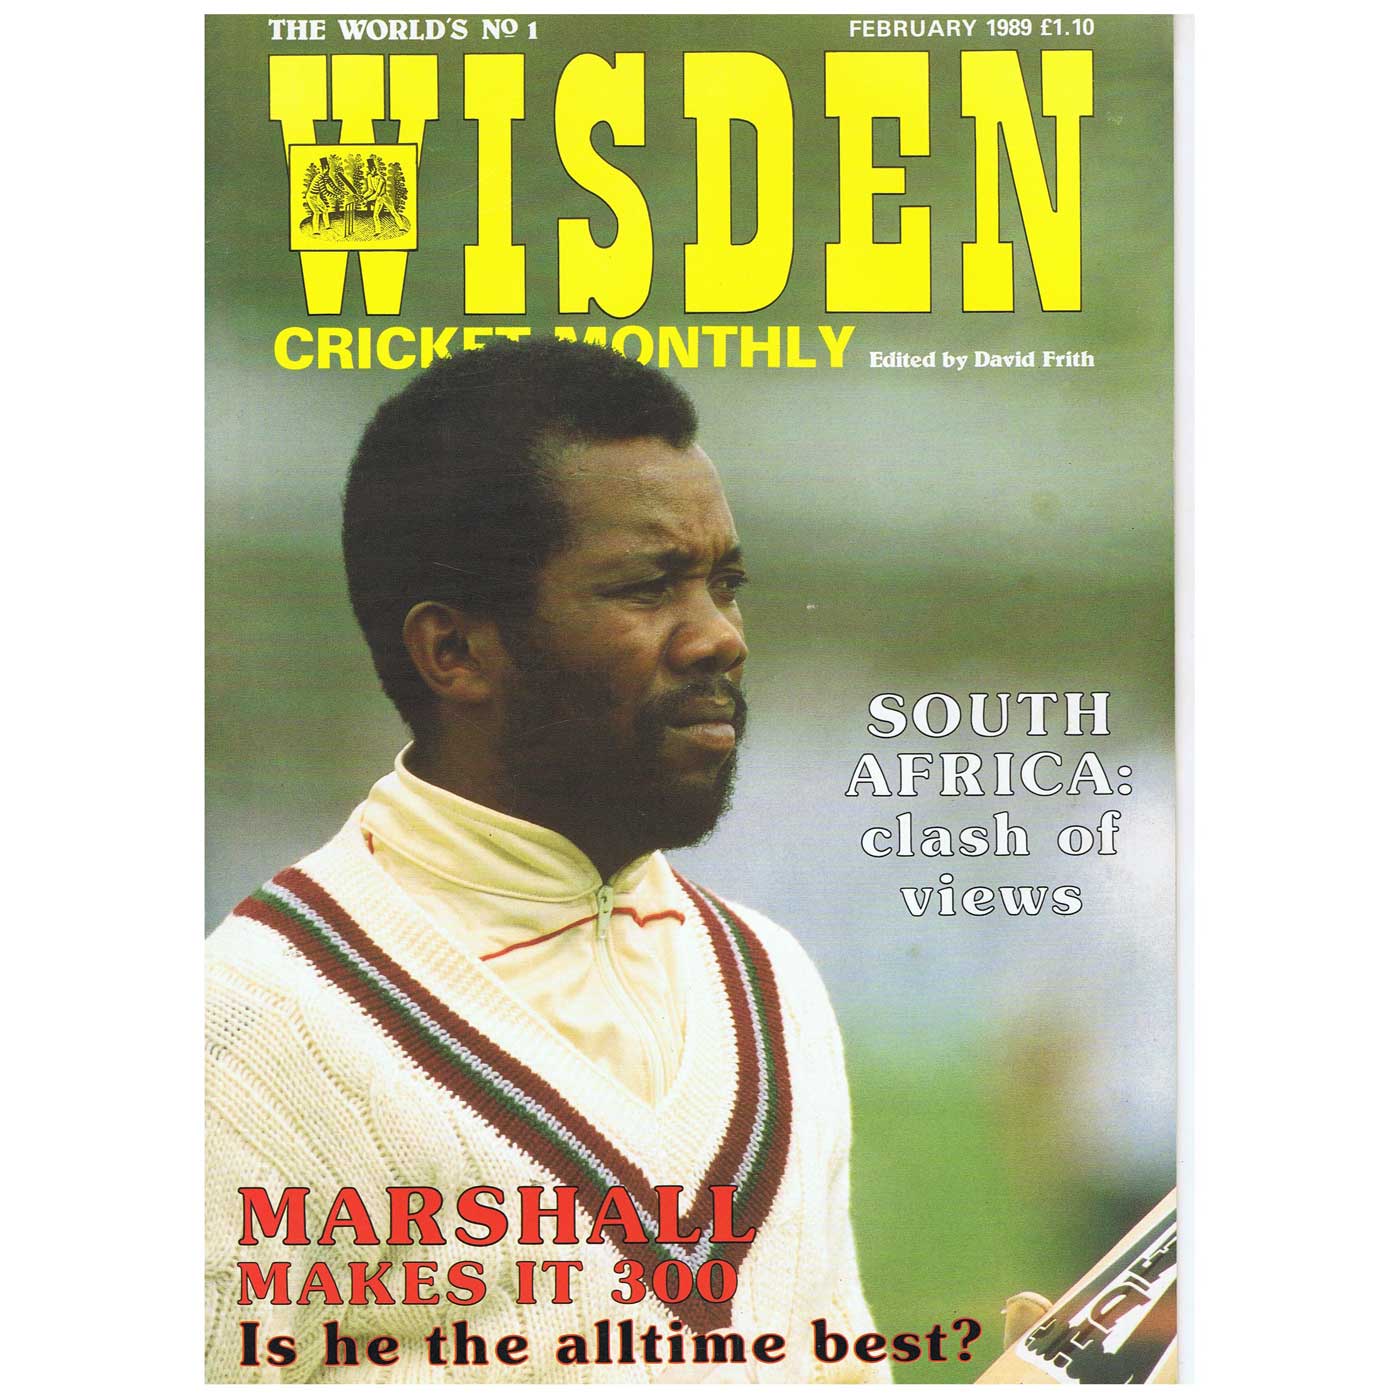 Wisden Cricket Monthly - an original edition from February 1989